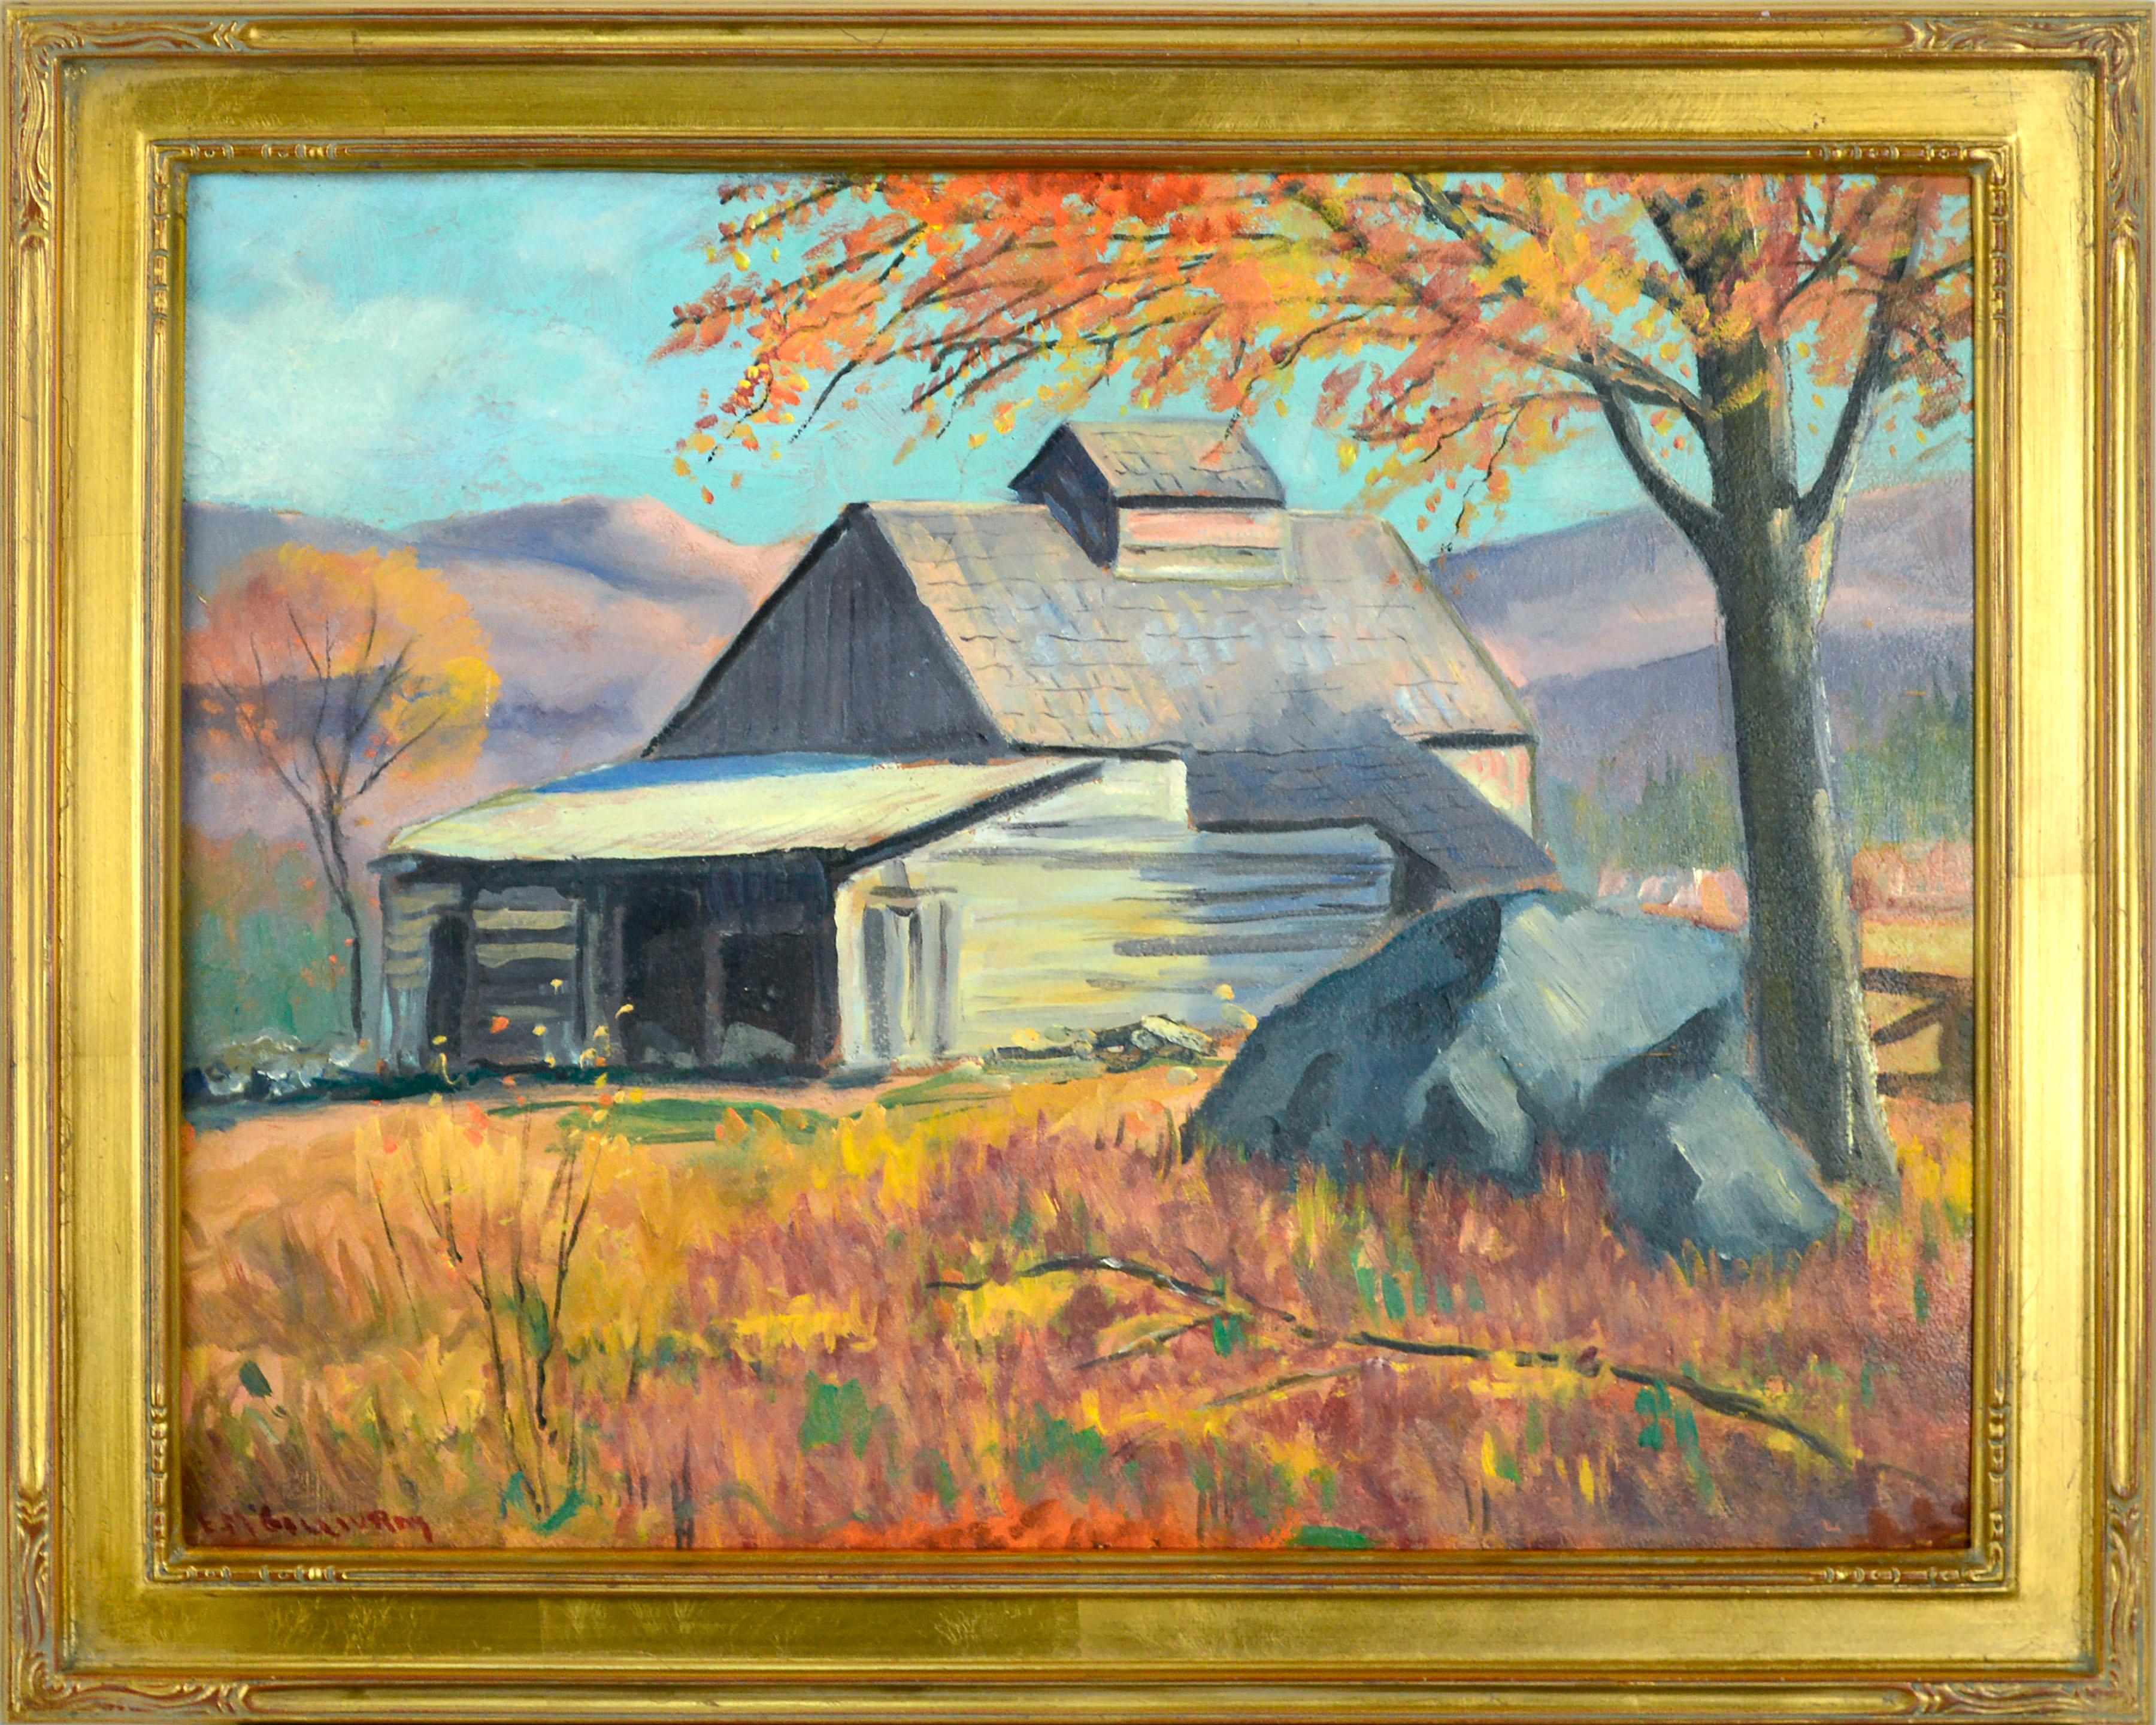 Florence Helena McGillivray  Landscape Painting - Farmhouse in Autumn, Early 20th Century Landscape by Florence Helena McGillivray